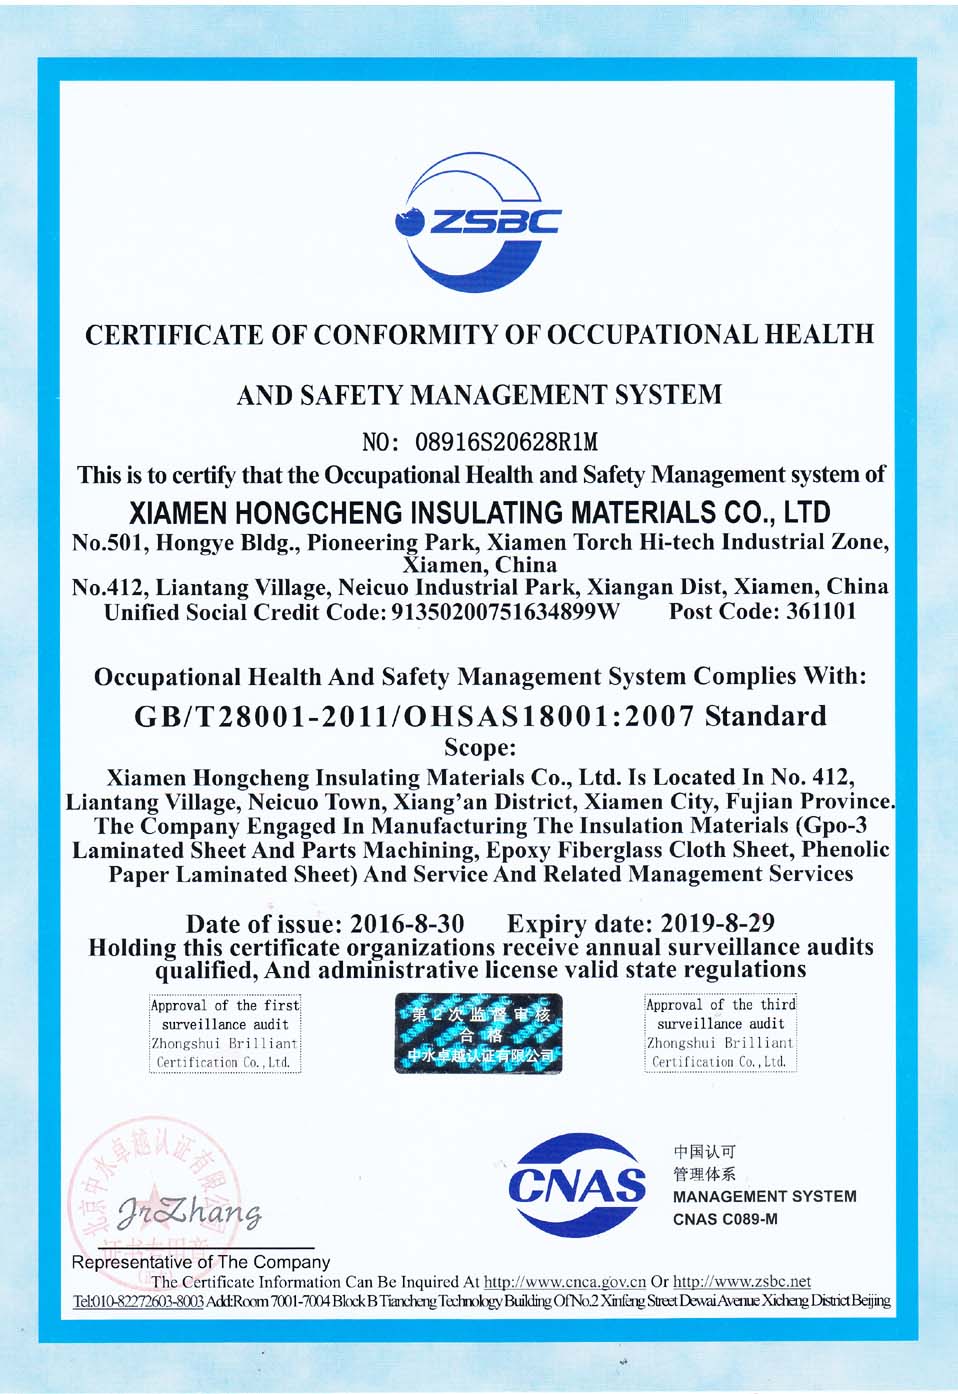 Certificate of corformity of occupational health and safety management system